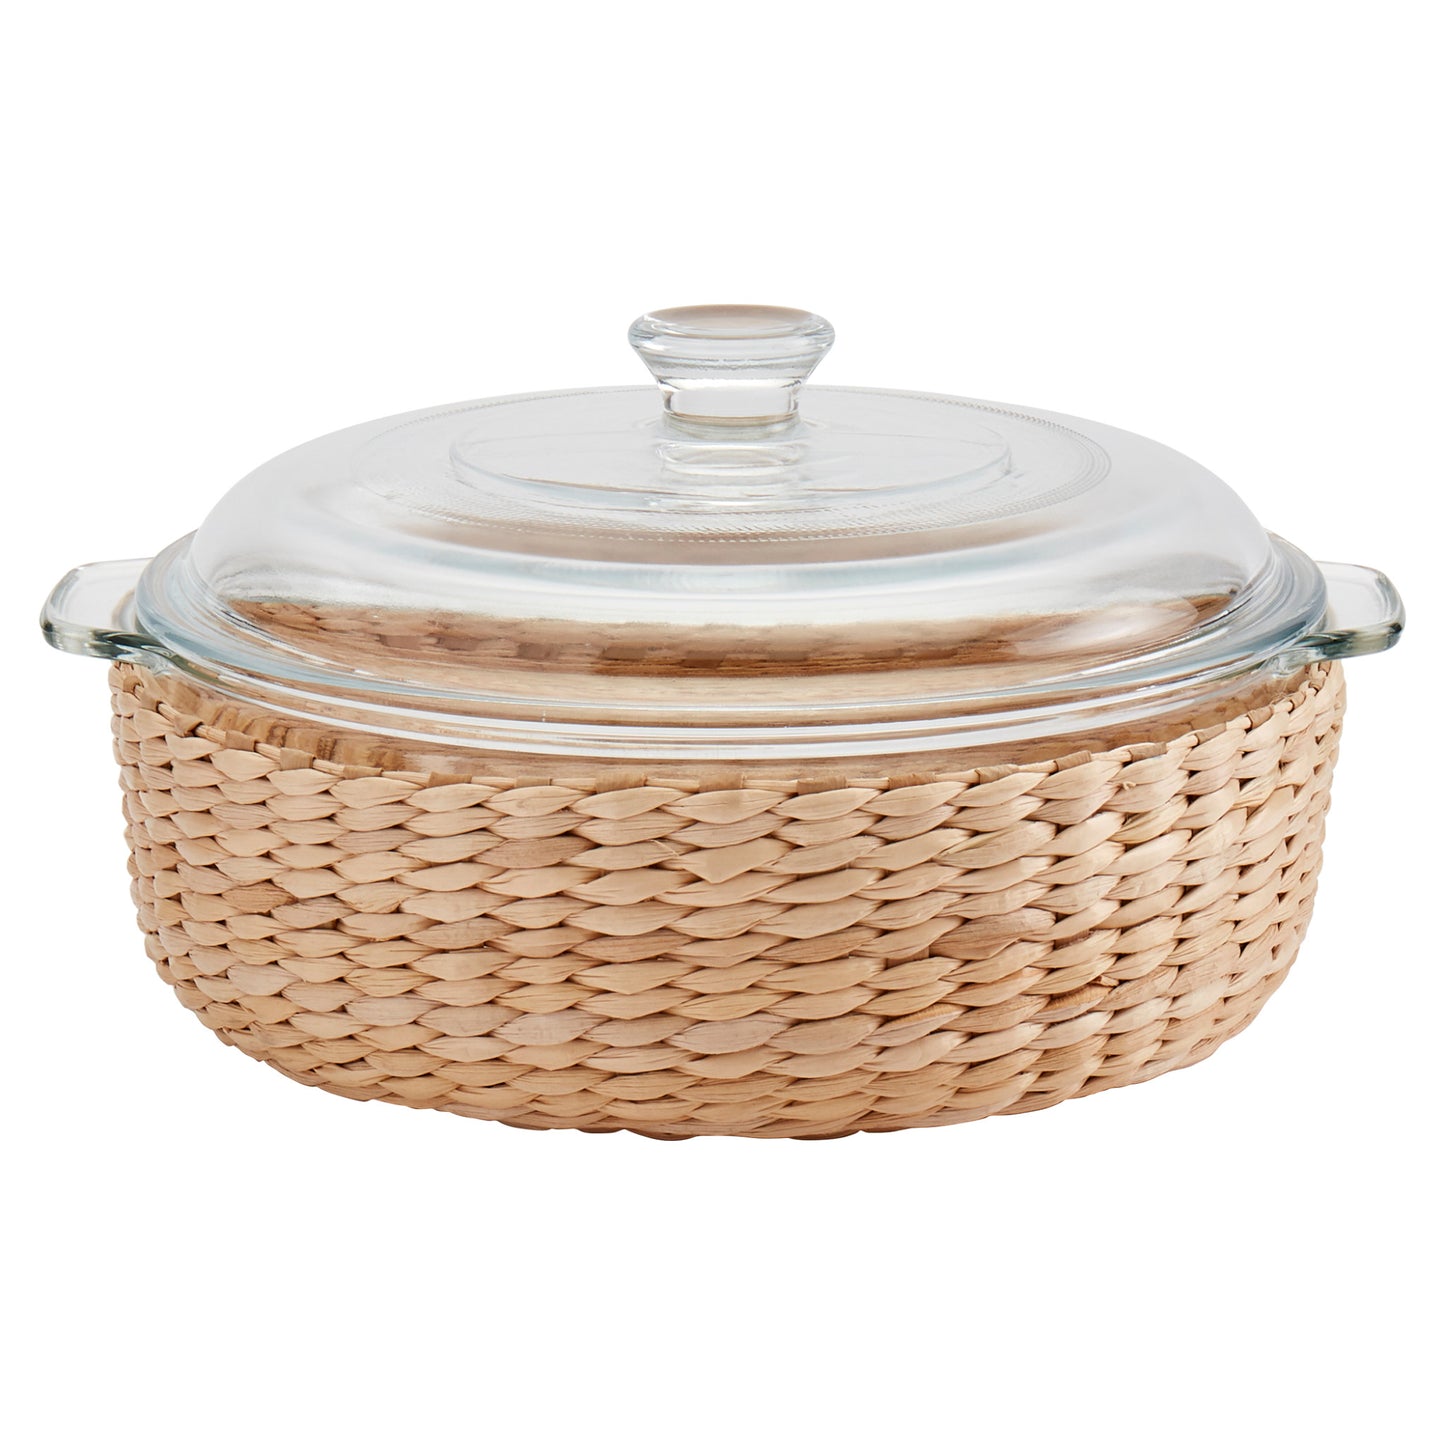 Dolly Wicker Covered Casserole